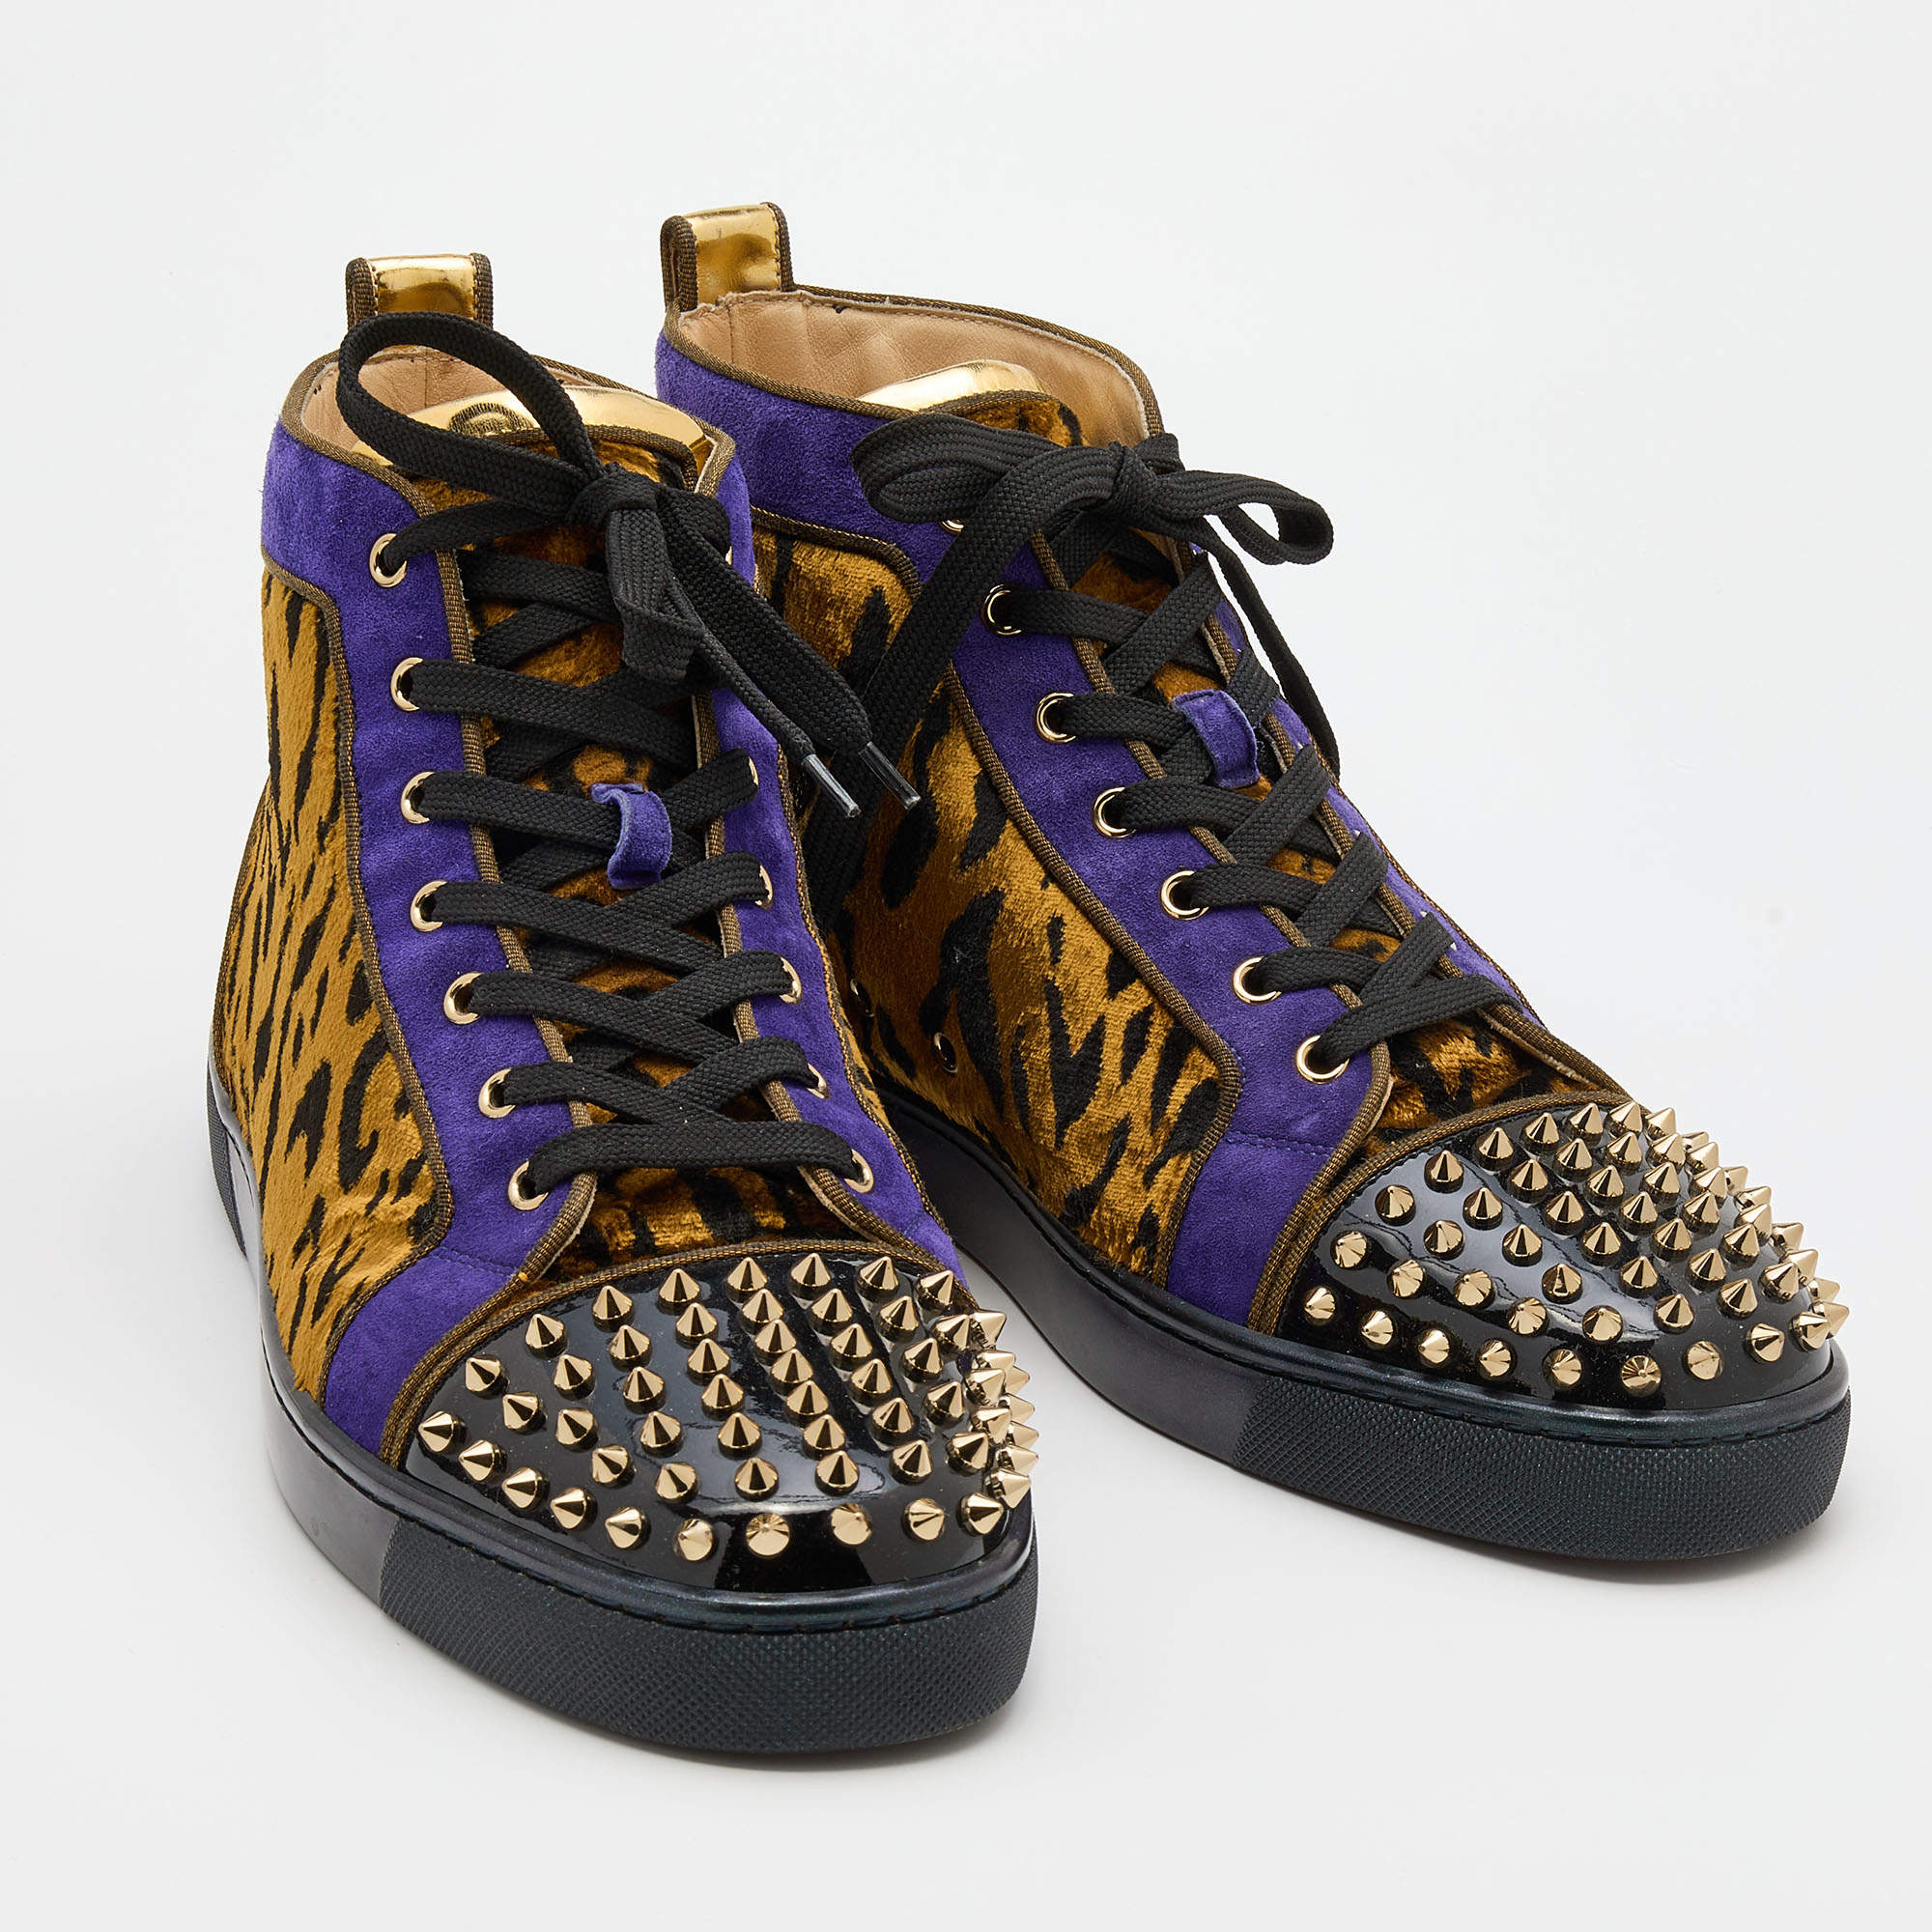 Christian Louboutin Multicolor Leather and Animal Print Fabric Lou Spikes  Sneakers Size 43.5 Christian Louboutin